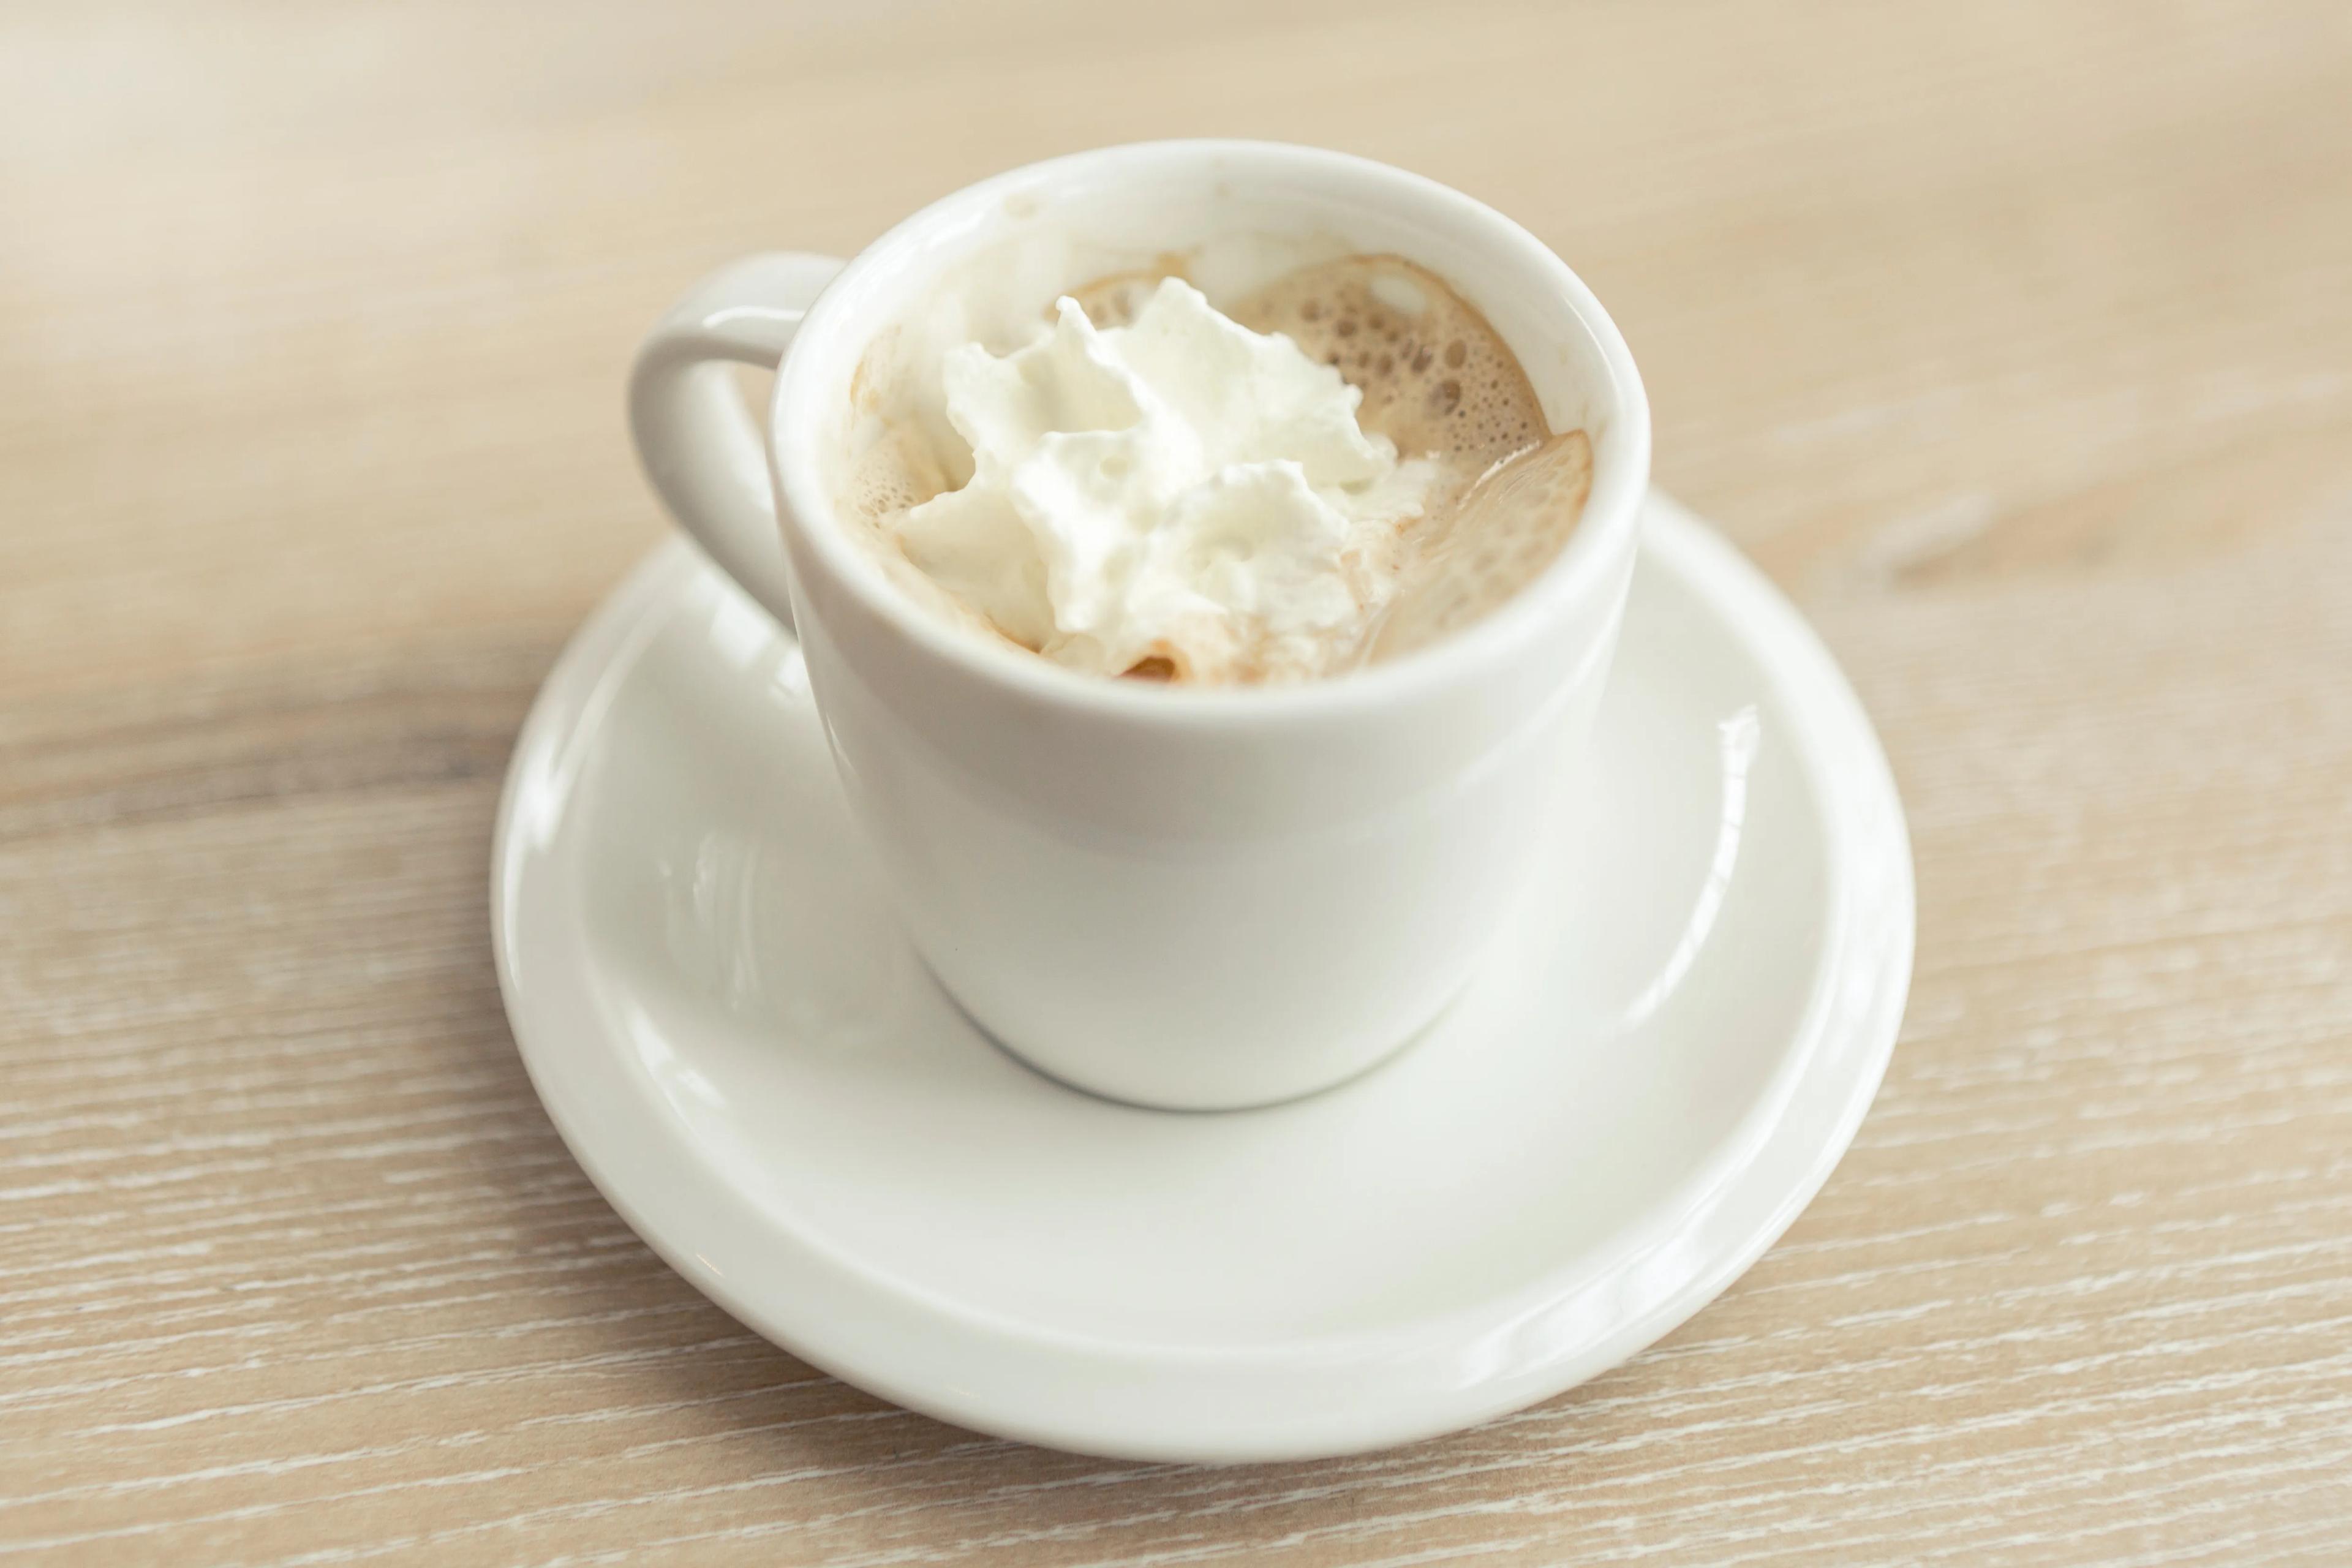 Free Images : cafe, latte, hot chocolate, cappuccino, dish, food, drink ...